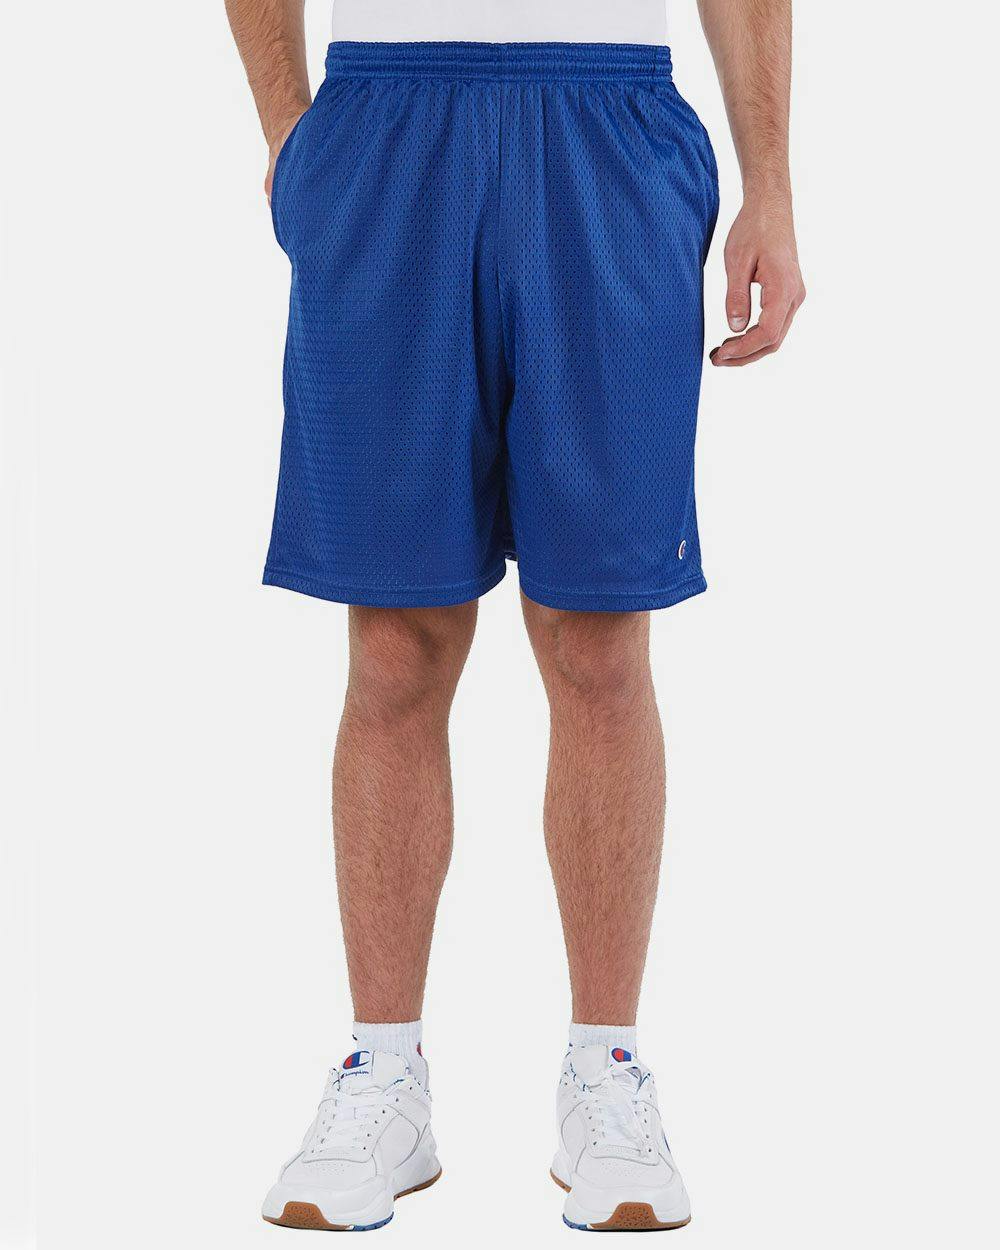 Image for Polyester Mesh 9" Shorts with Pockets - S162